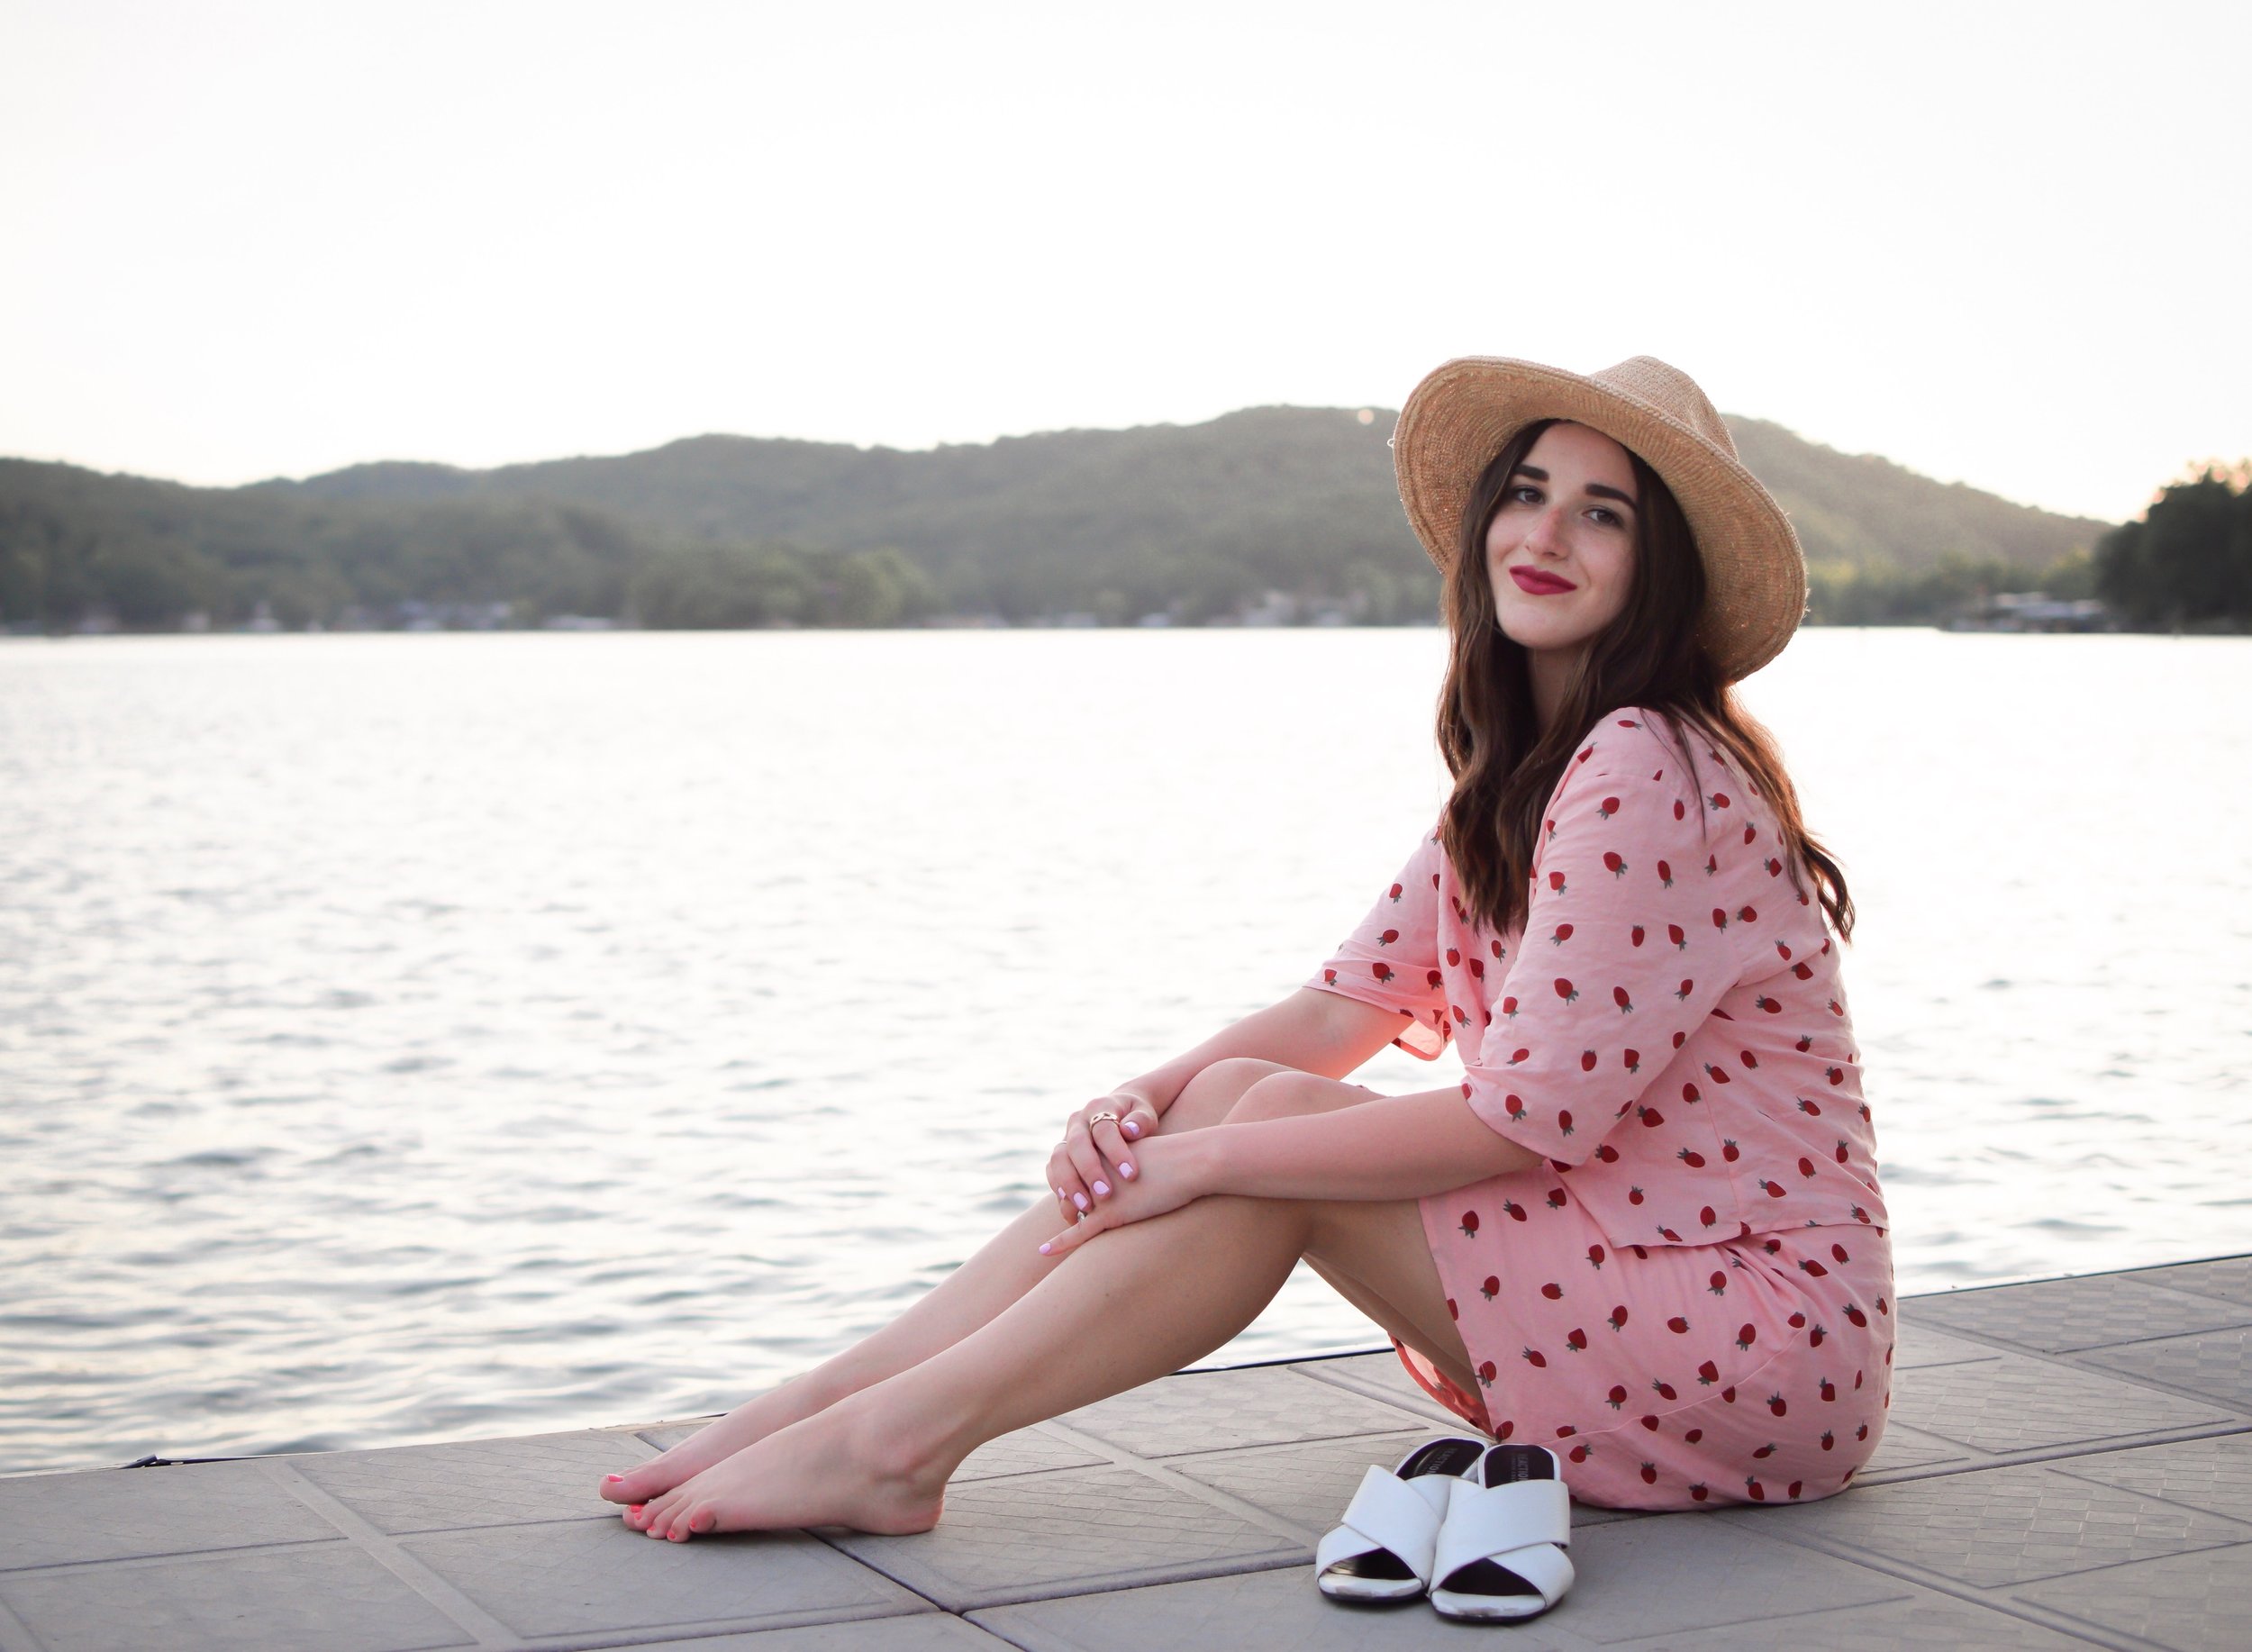 Strawberry Set Walmart Fashion Esther Santer Fashion Blog NYC Street Style Blogger Outfit OOTD Trendy Shopping Girl What How To Wear Affordable Fruit Trend Straw Hat Vacation Lake of the Ozarks White Mules Sandals Nature Travel Shopping  Two Piece Set.JPG